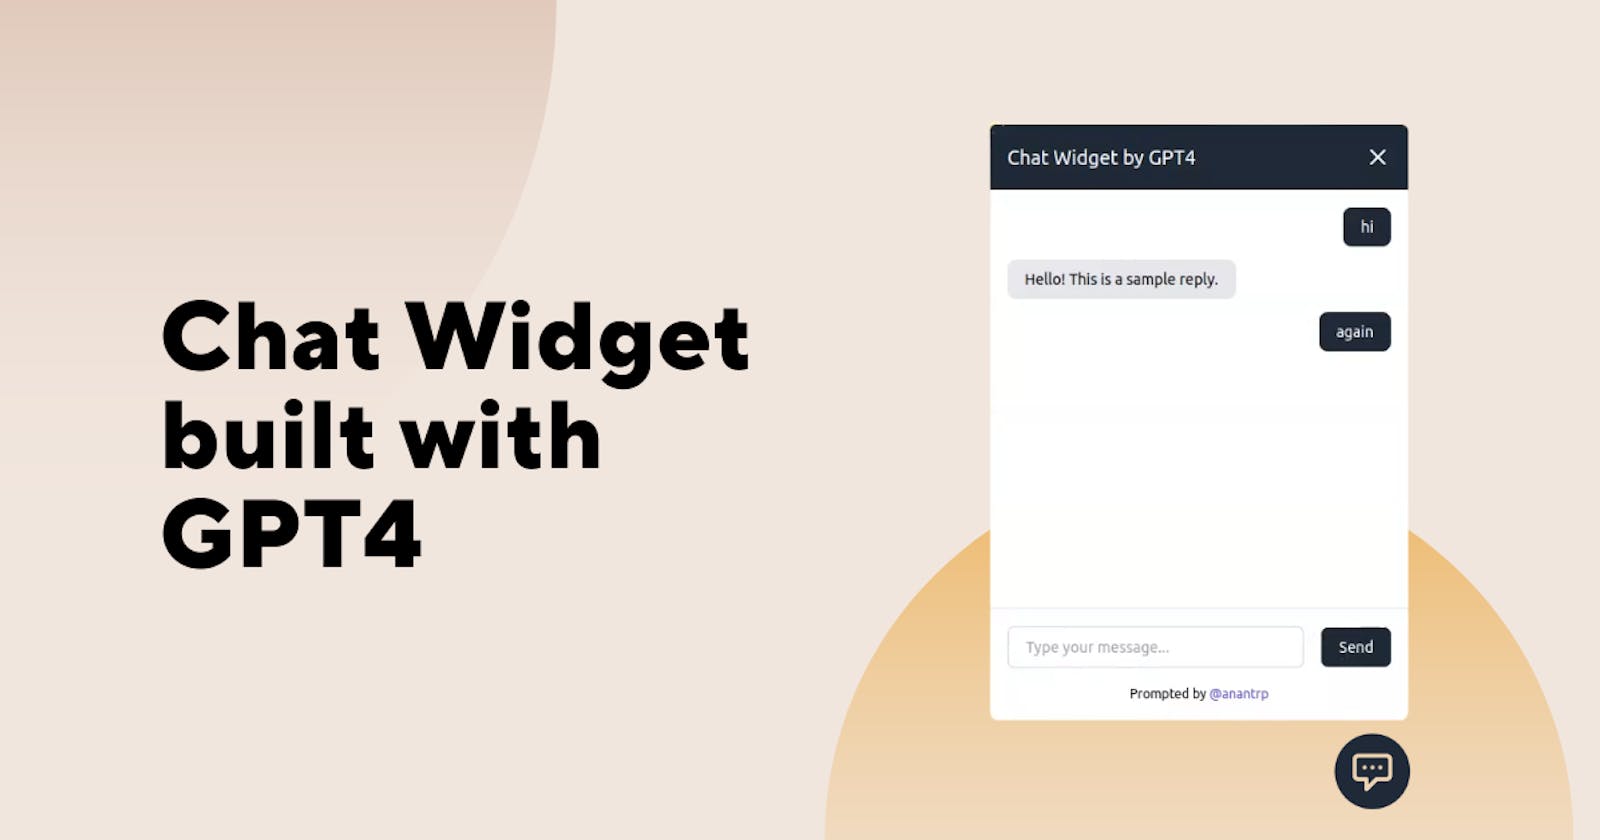 How I built a chat widget with ChatGPT in under an hour